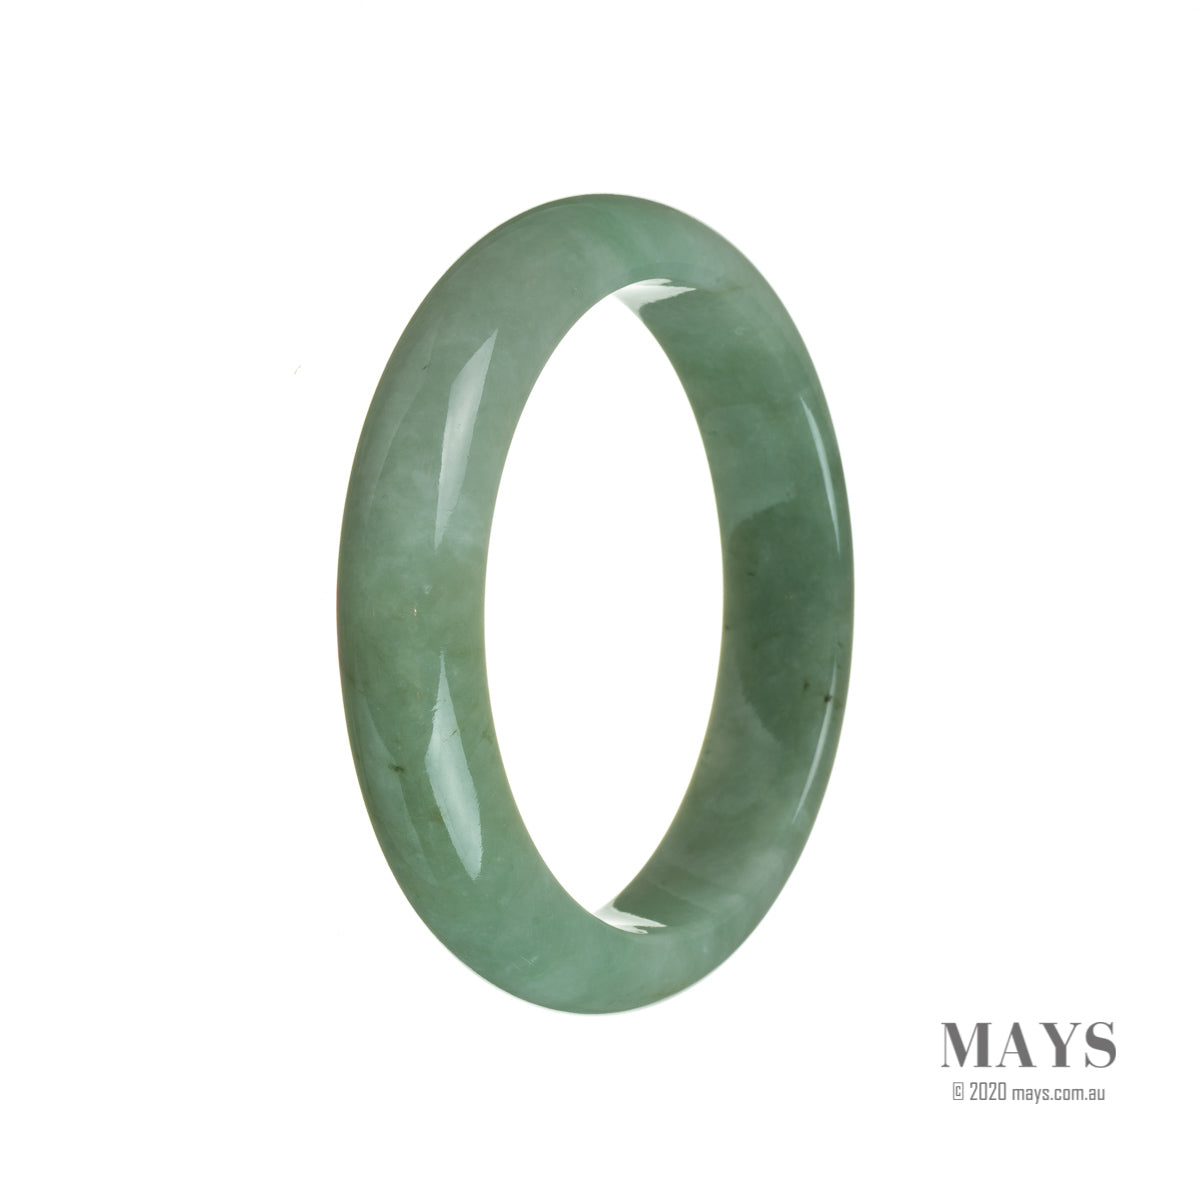 A close-up photo of a beautiful, green jade bangle with a semi-round shape. It is made from genuine natural green Burma jade and measures 58mm in diameter. The bangle is crafted with care and is a stunning accessory to add to any jewelry collection.